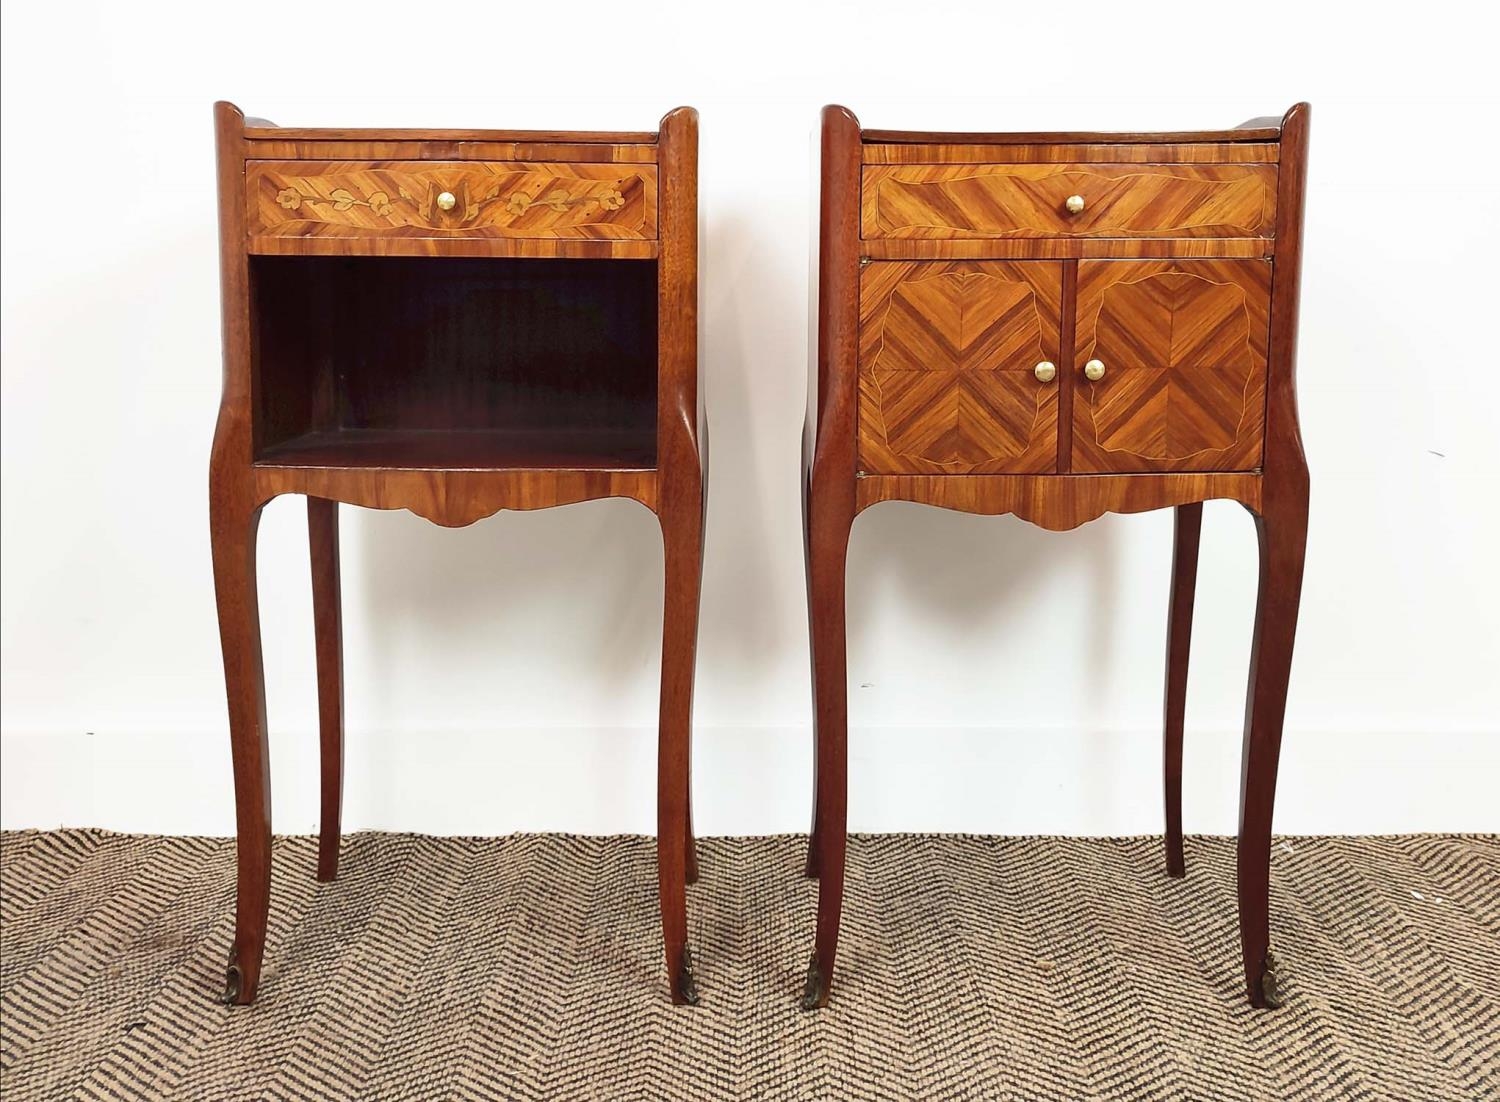 BEDSIDE CABINETS, a matched pair, Louis XV style tulipwood and inlaid, one with marquetry and - Image 2 of 10